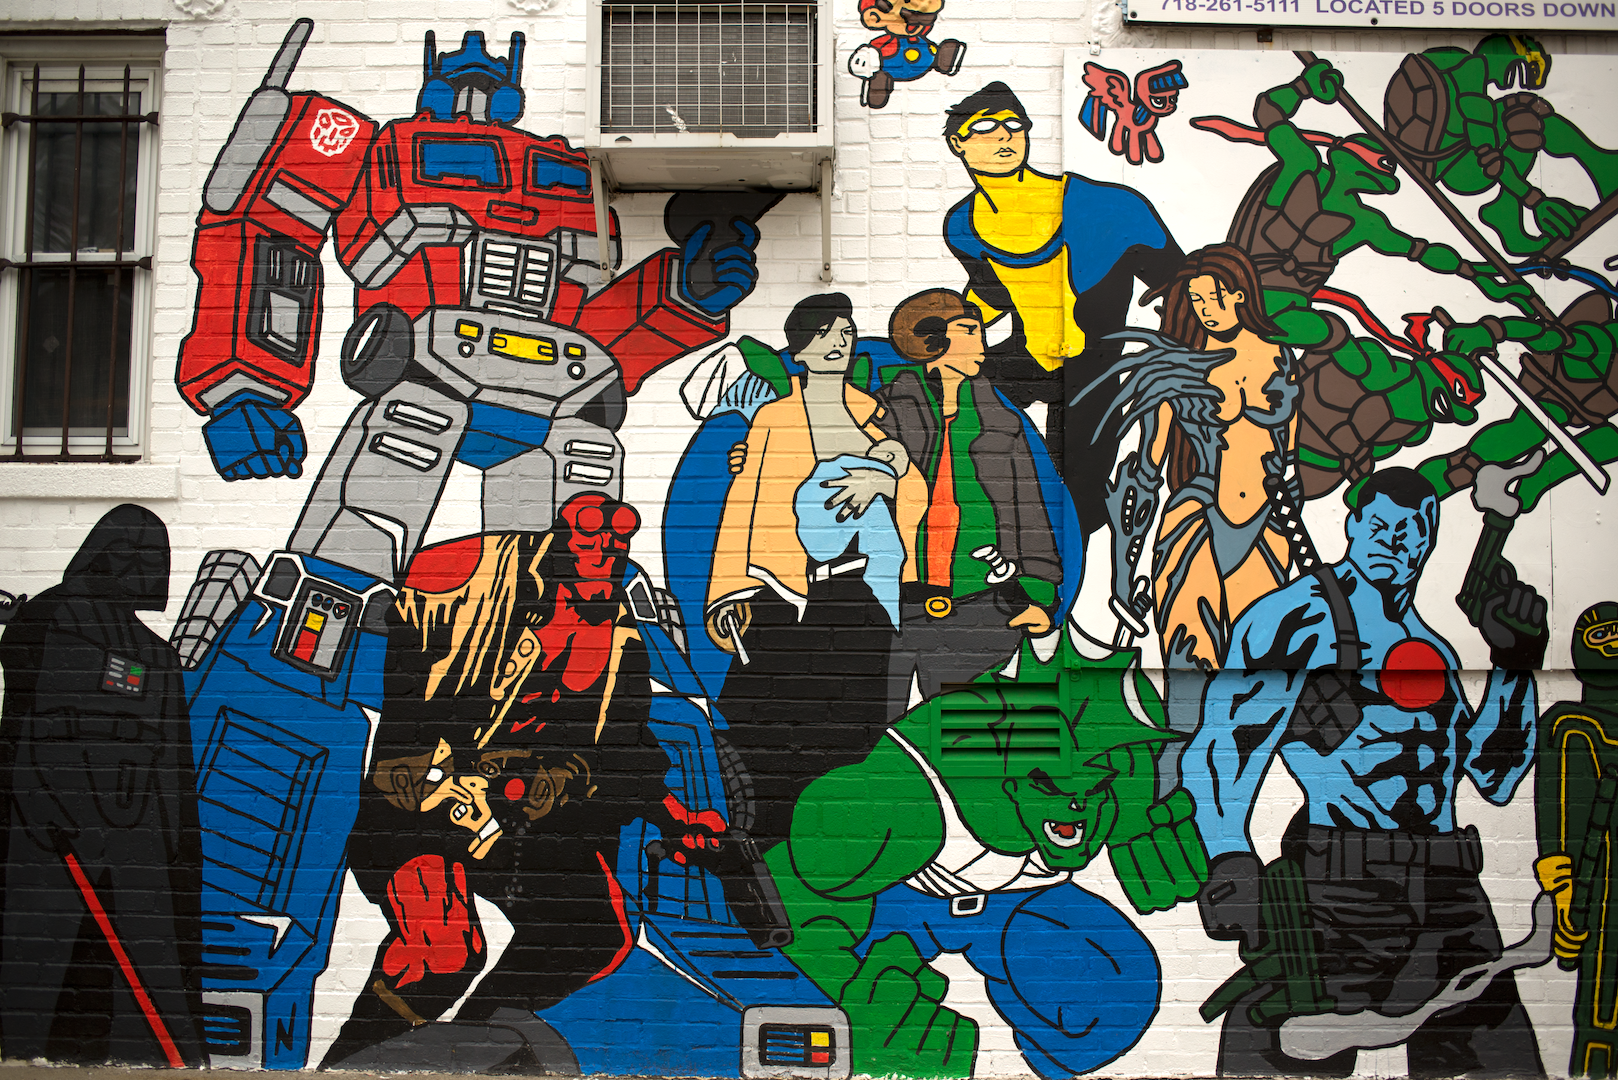 Royal Collectibles Mural Forest Hills